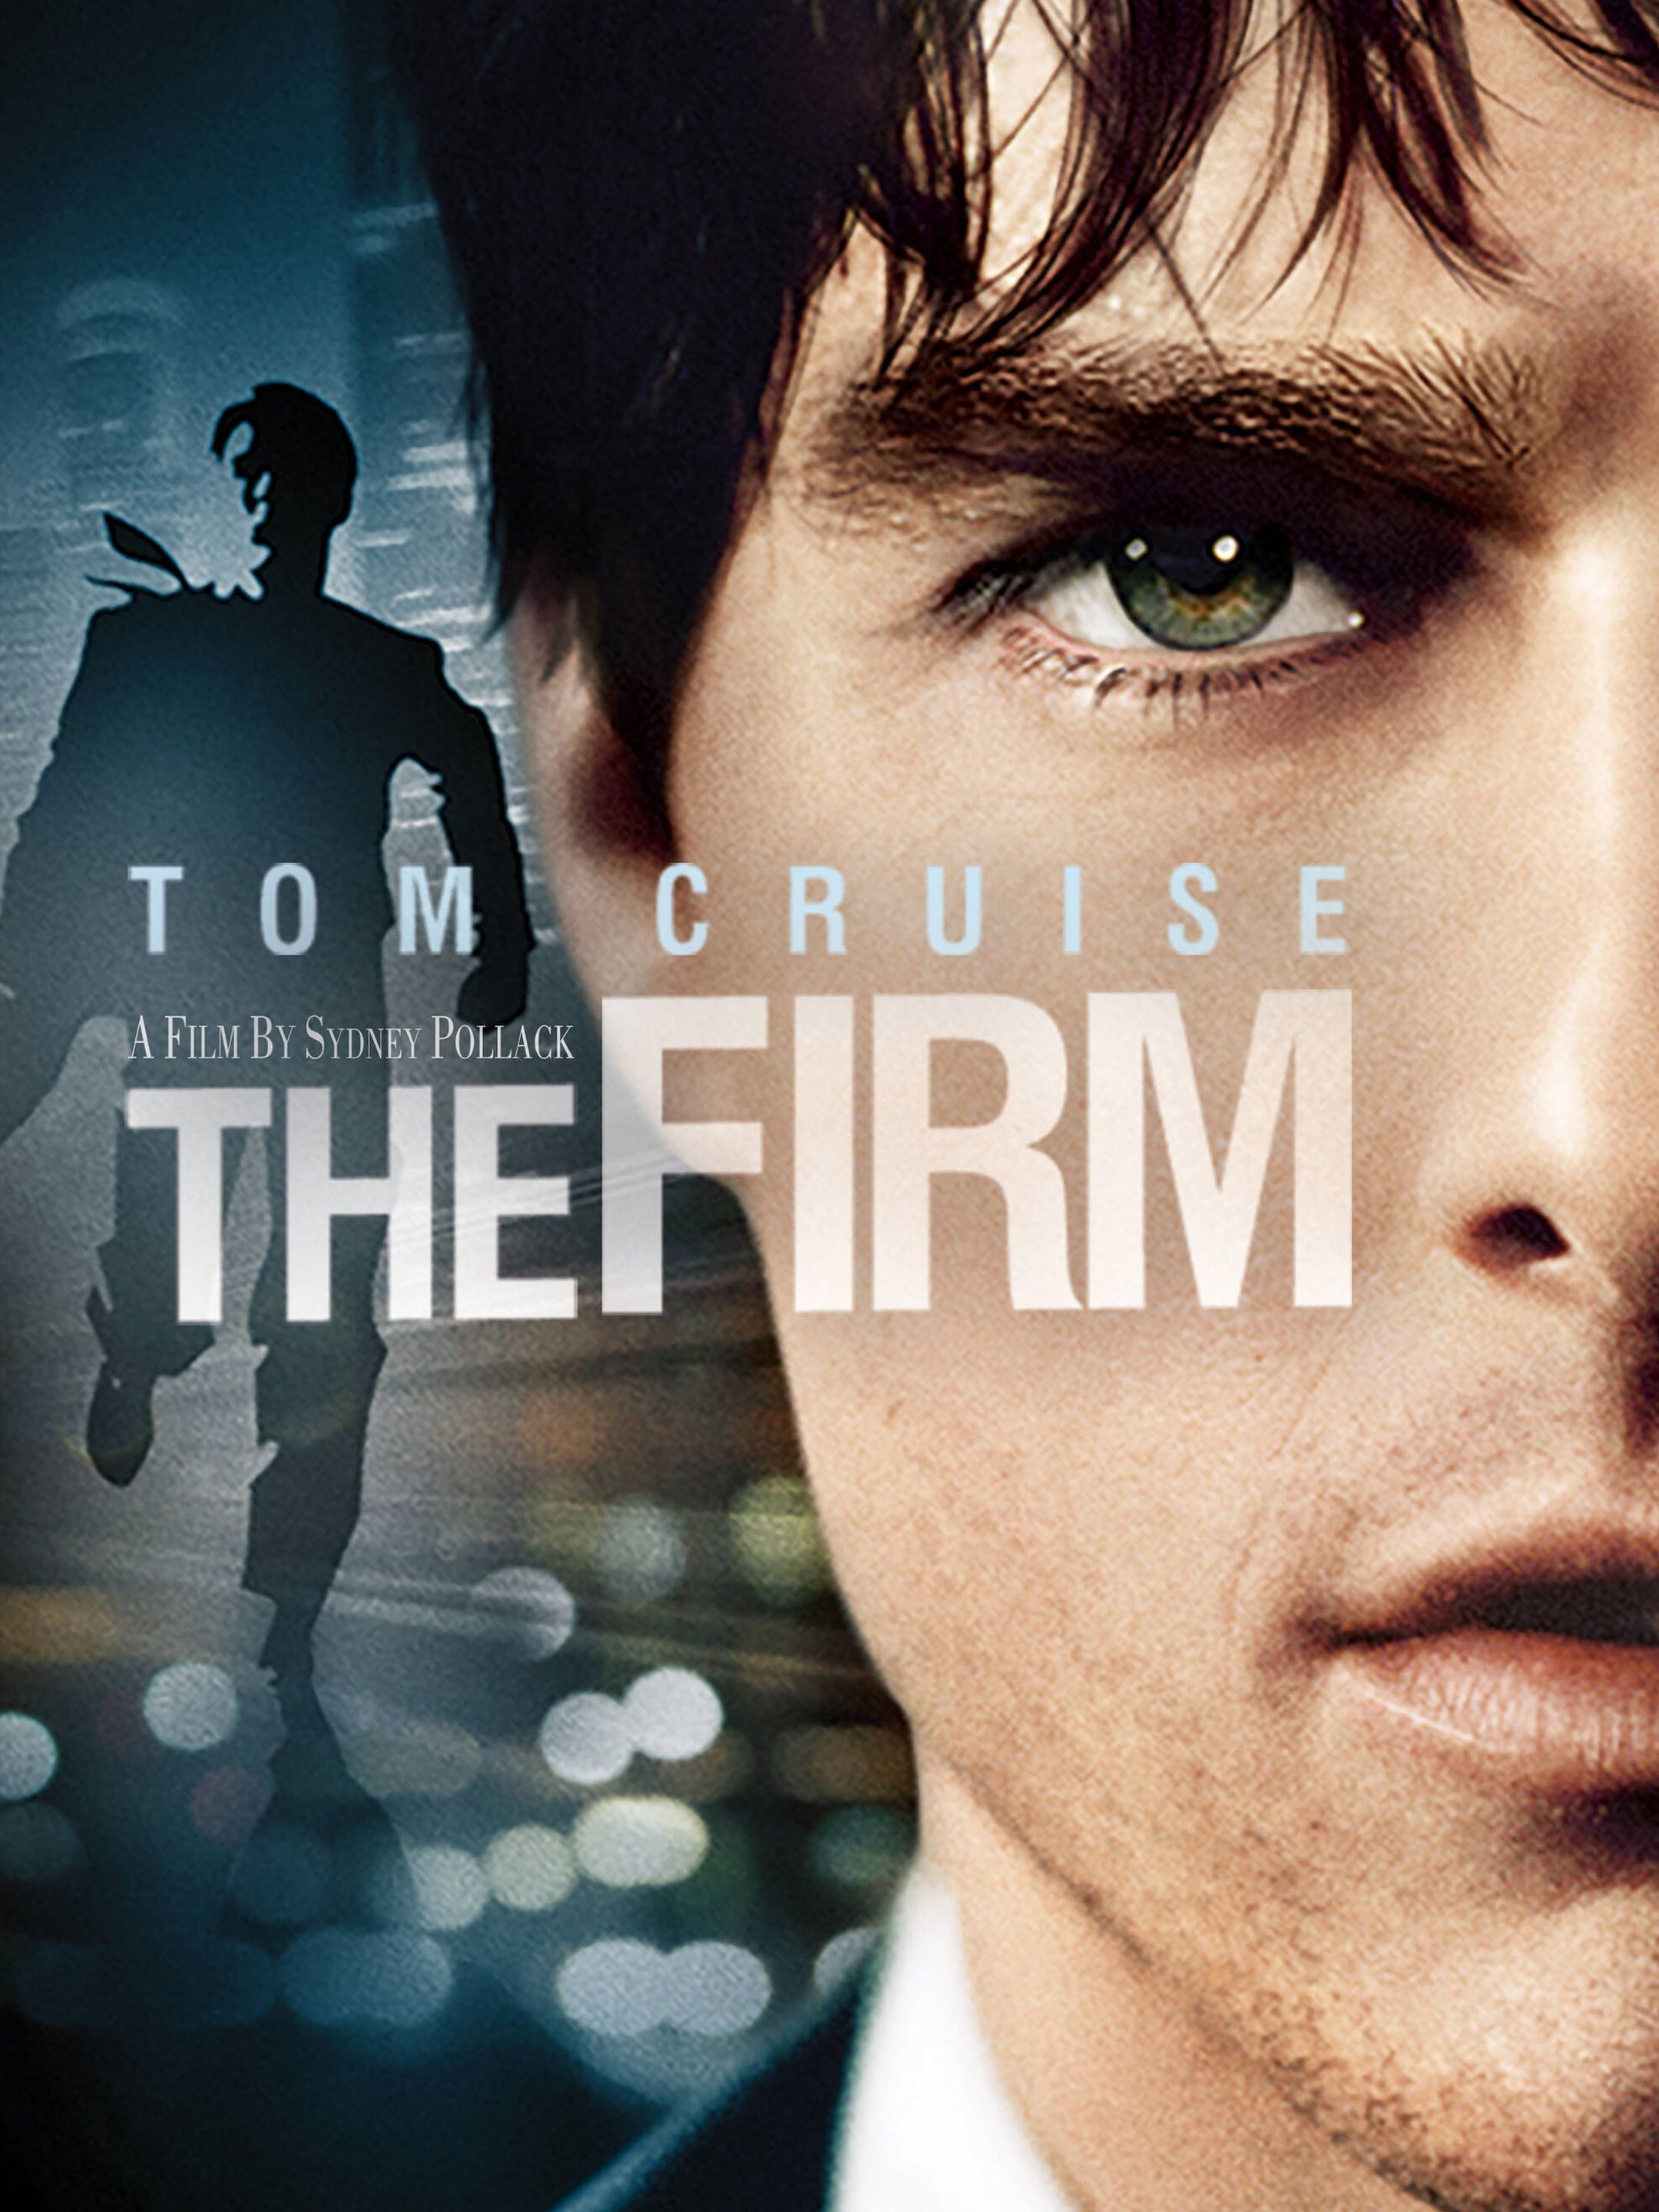 tom cruise brother the firm